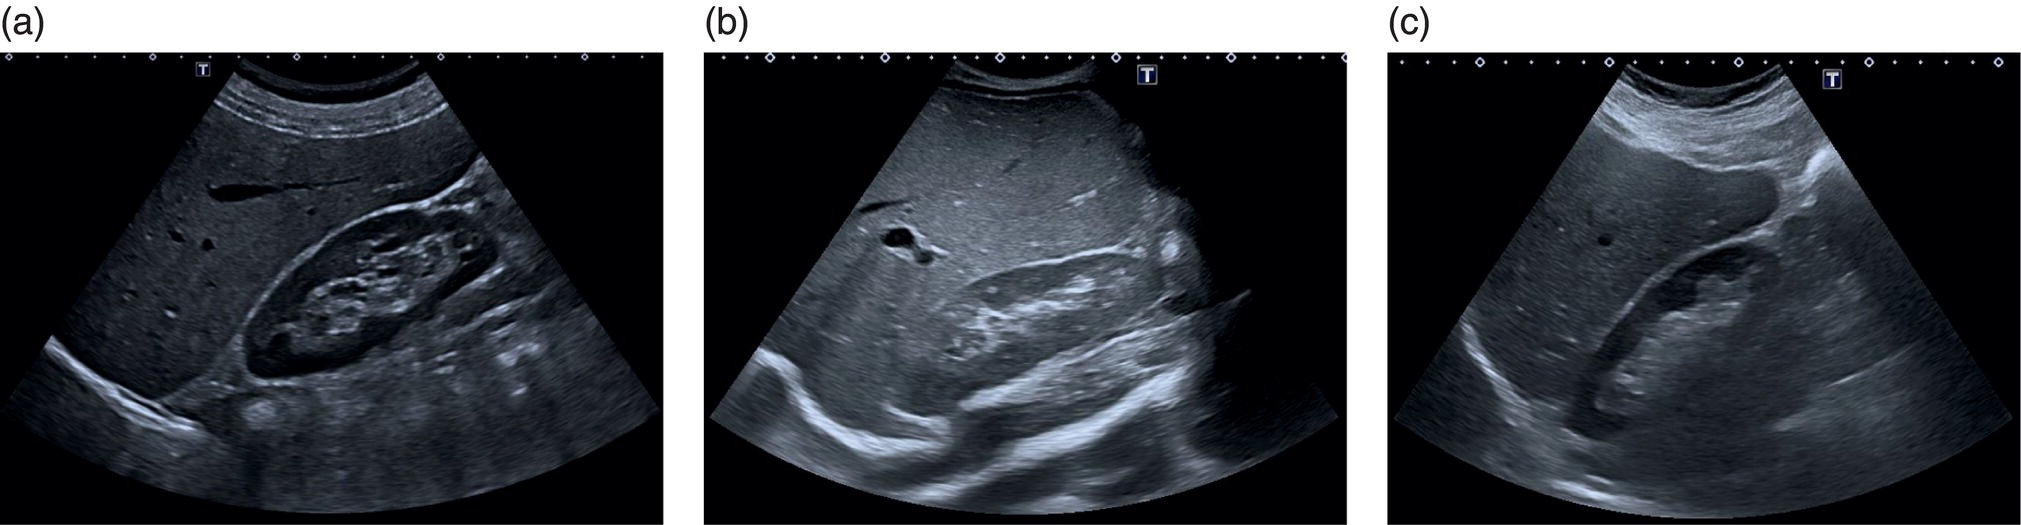 Three ultrasound scan images show a comparison of liver size to the right kidney. a. Size of the right lobe compared to the right kidney. b. Enlarged right liver lobe compared to the cortex of the right kidney. c. The right liver lobe is smaller.